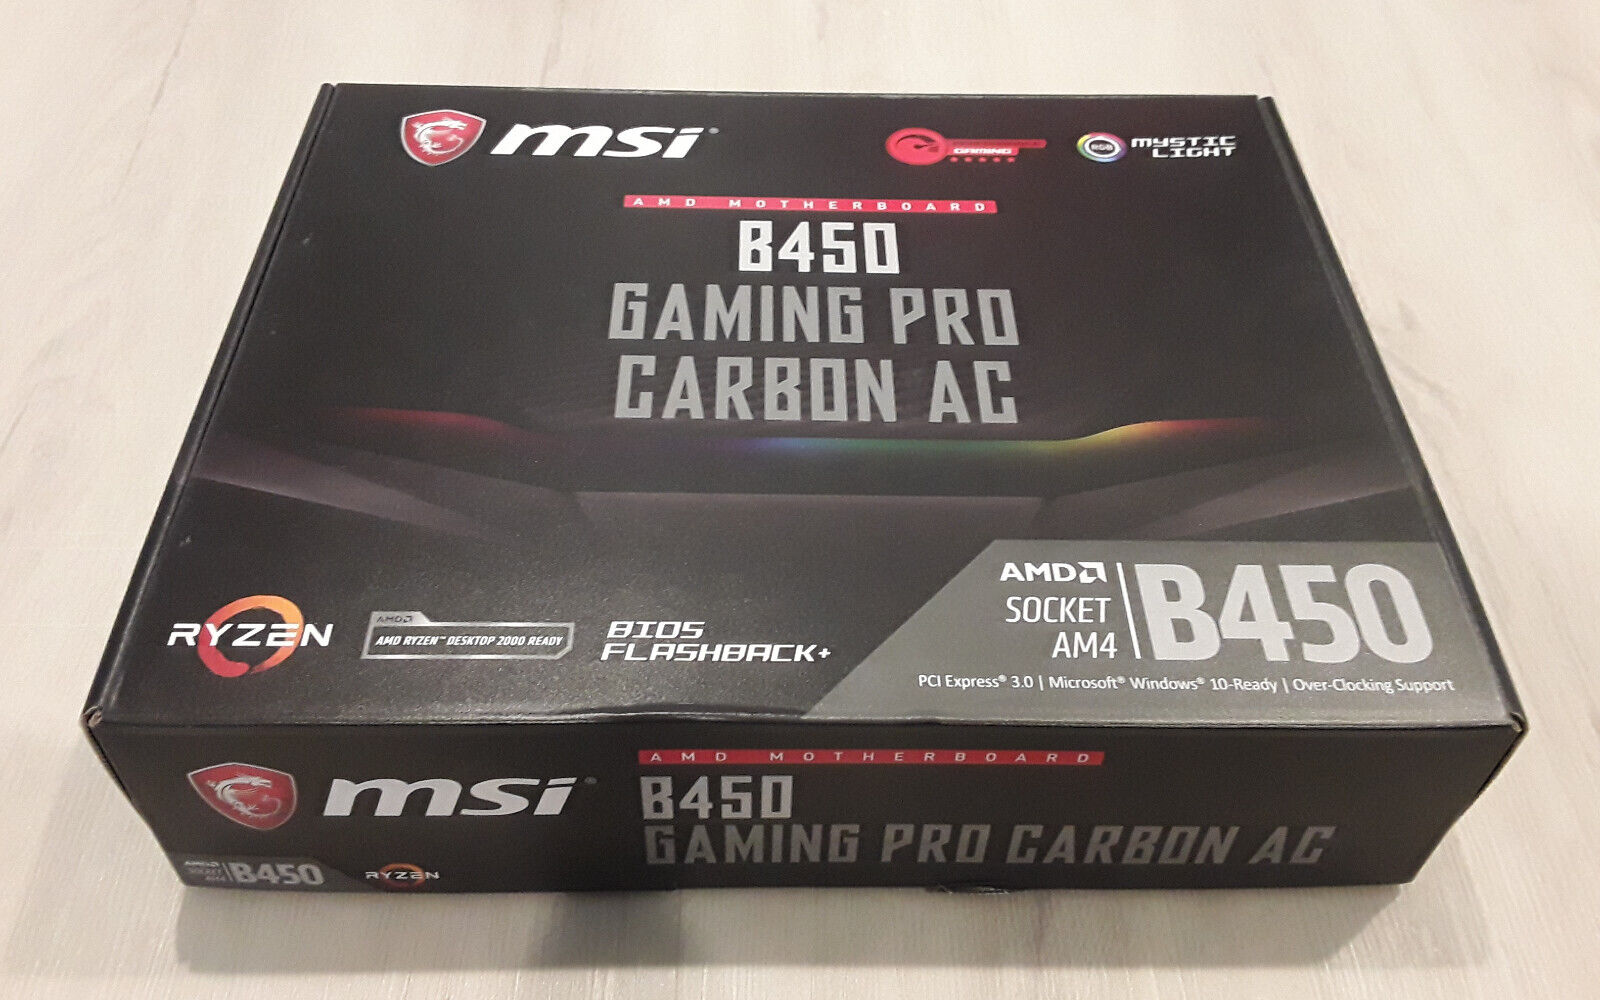 MSI B450 Gaming Pro Carbon AC Motherboard EMPTY BOX AMD CHIPSET SOCKET AM4